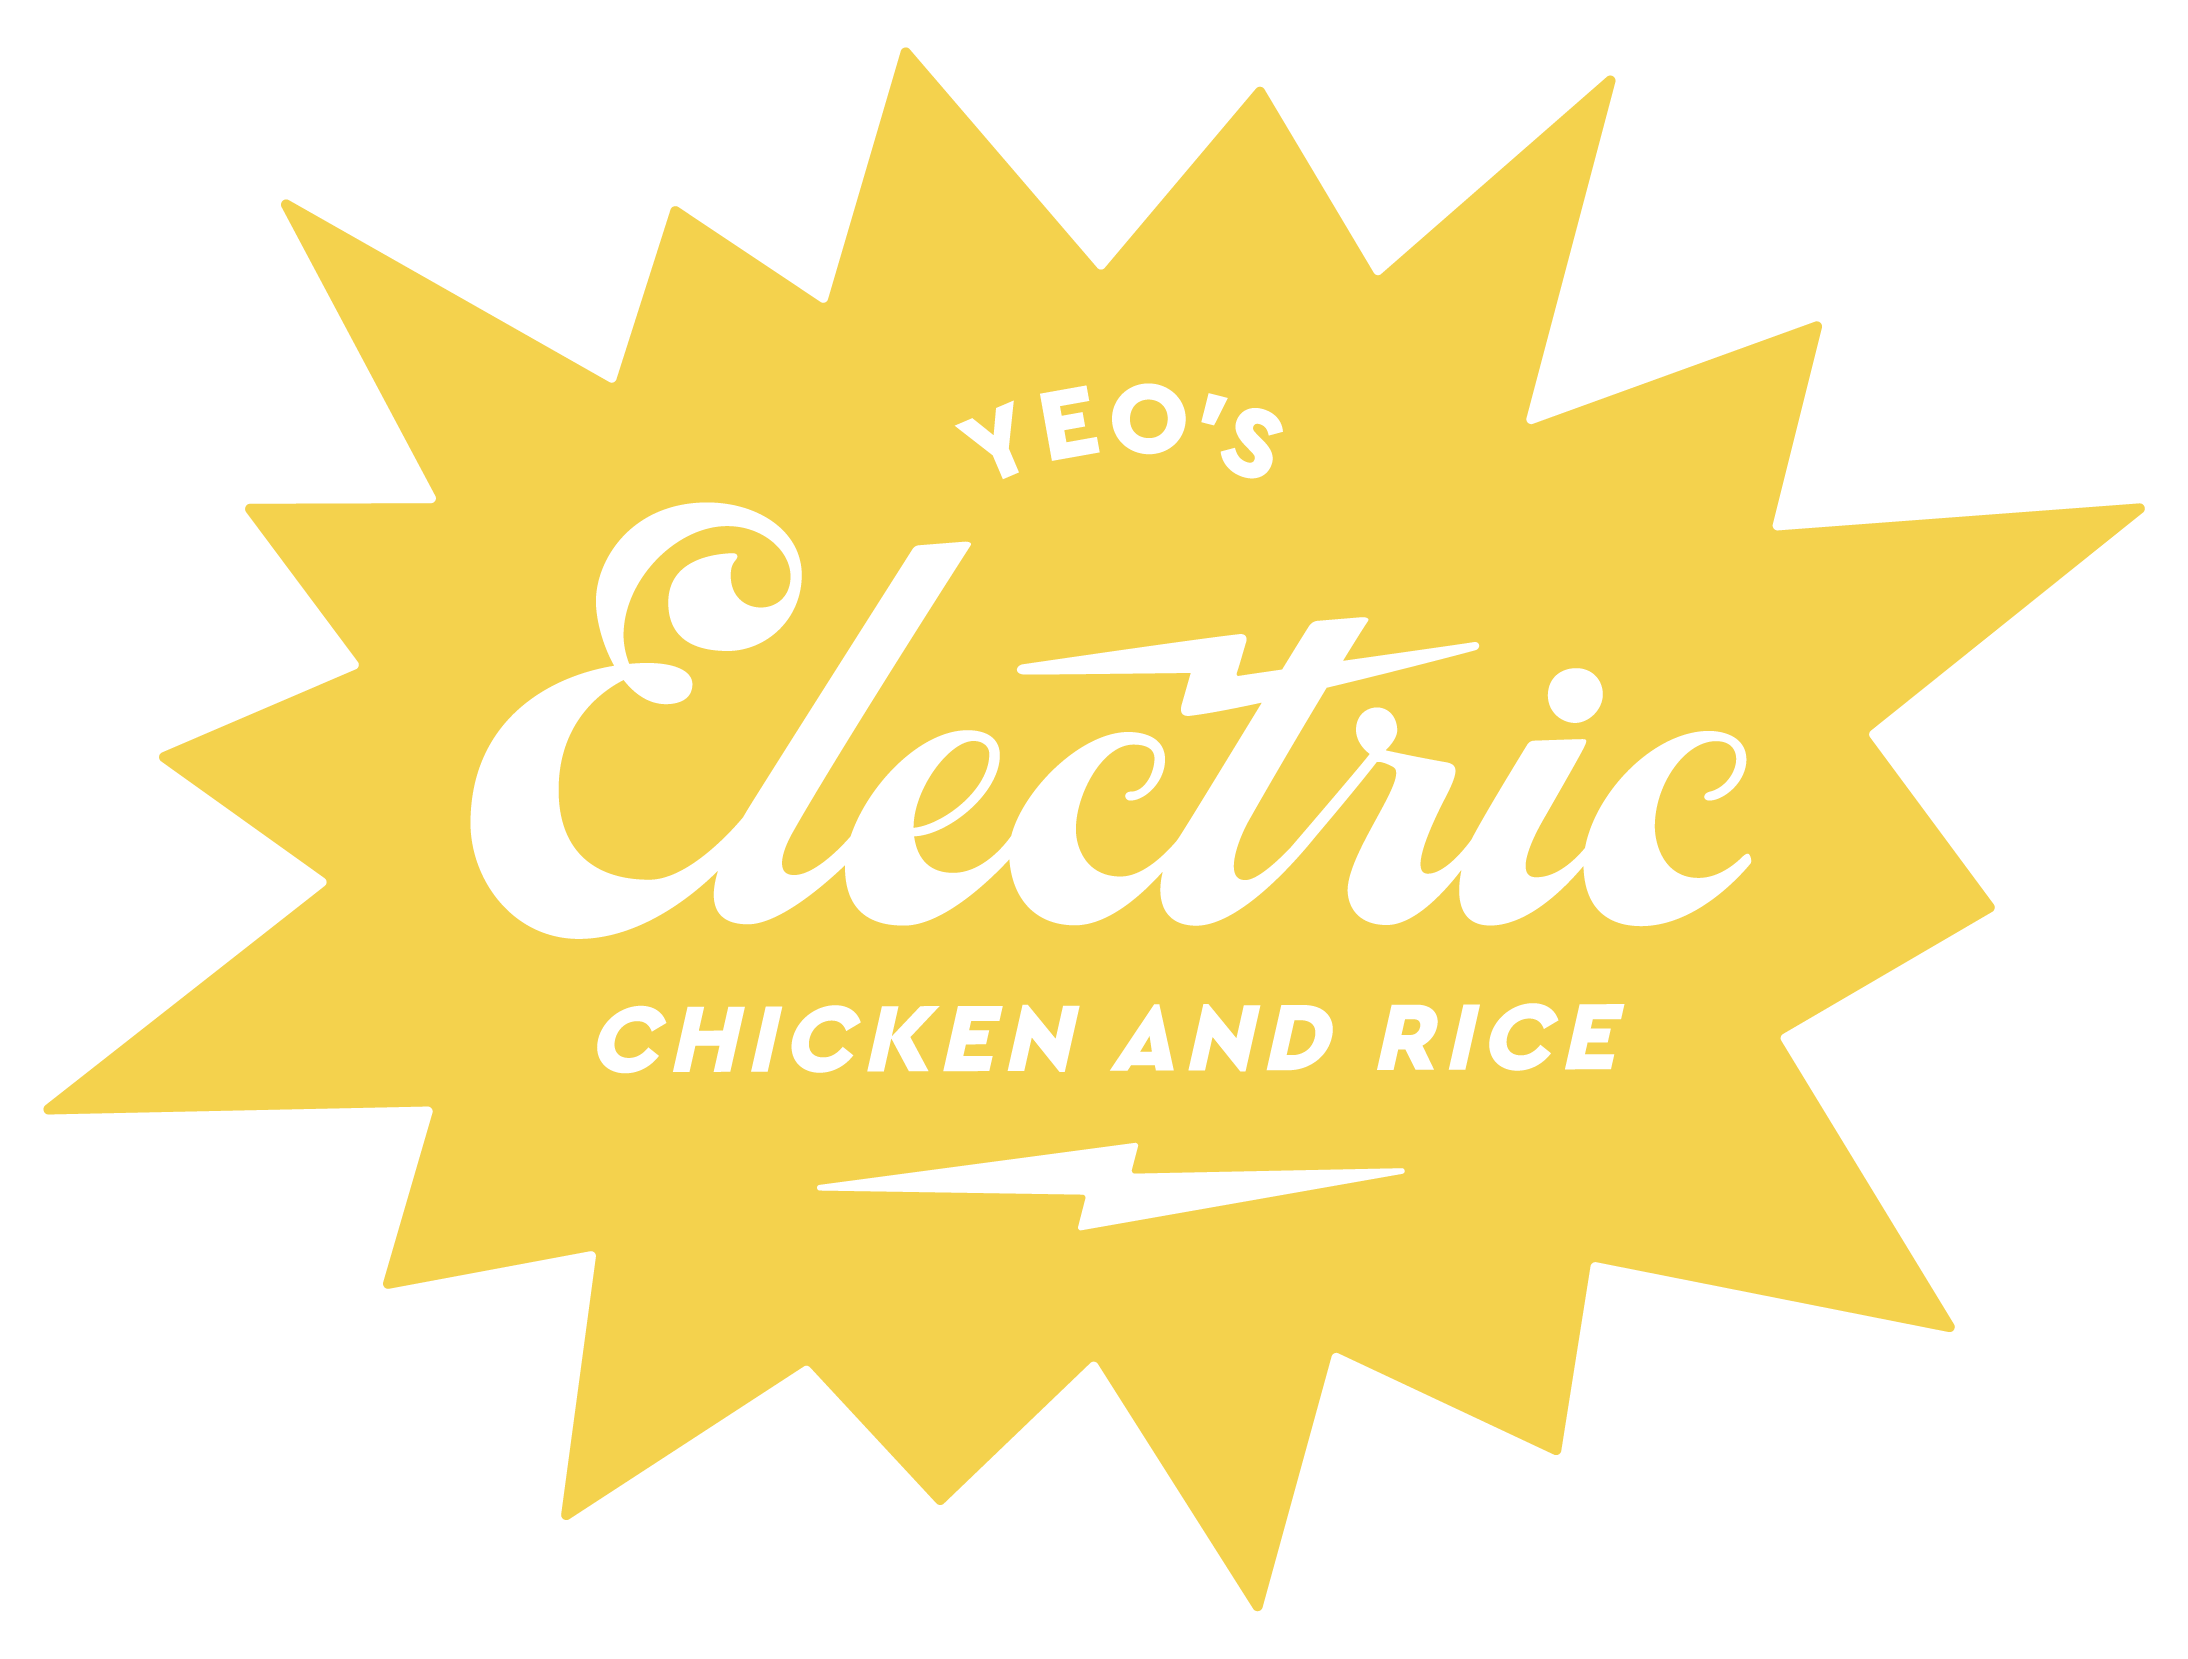 The Electric Chicken, LLC